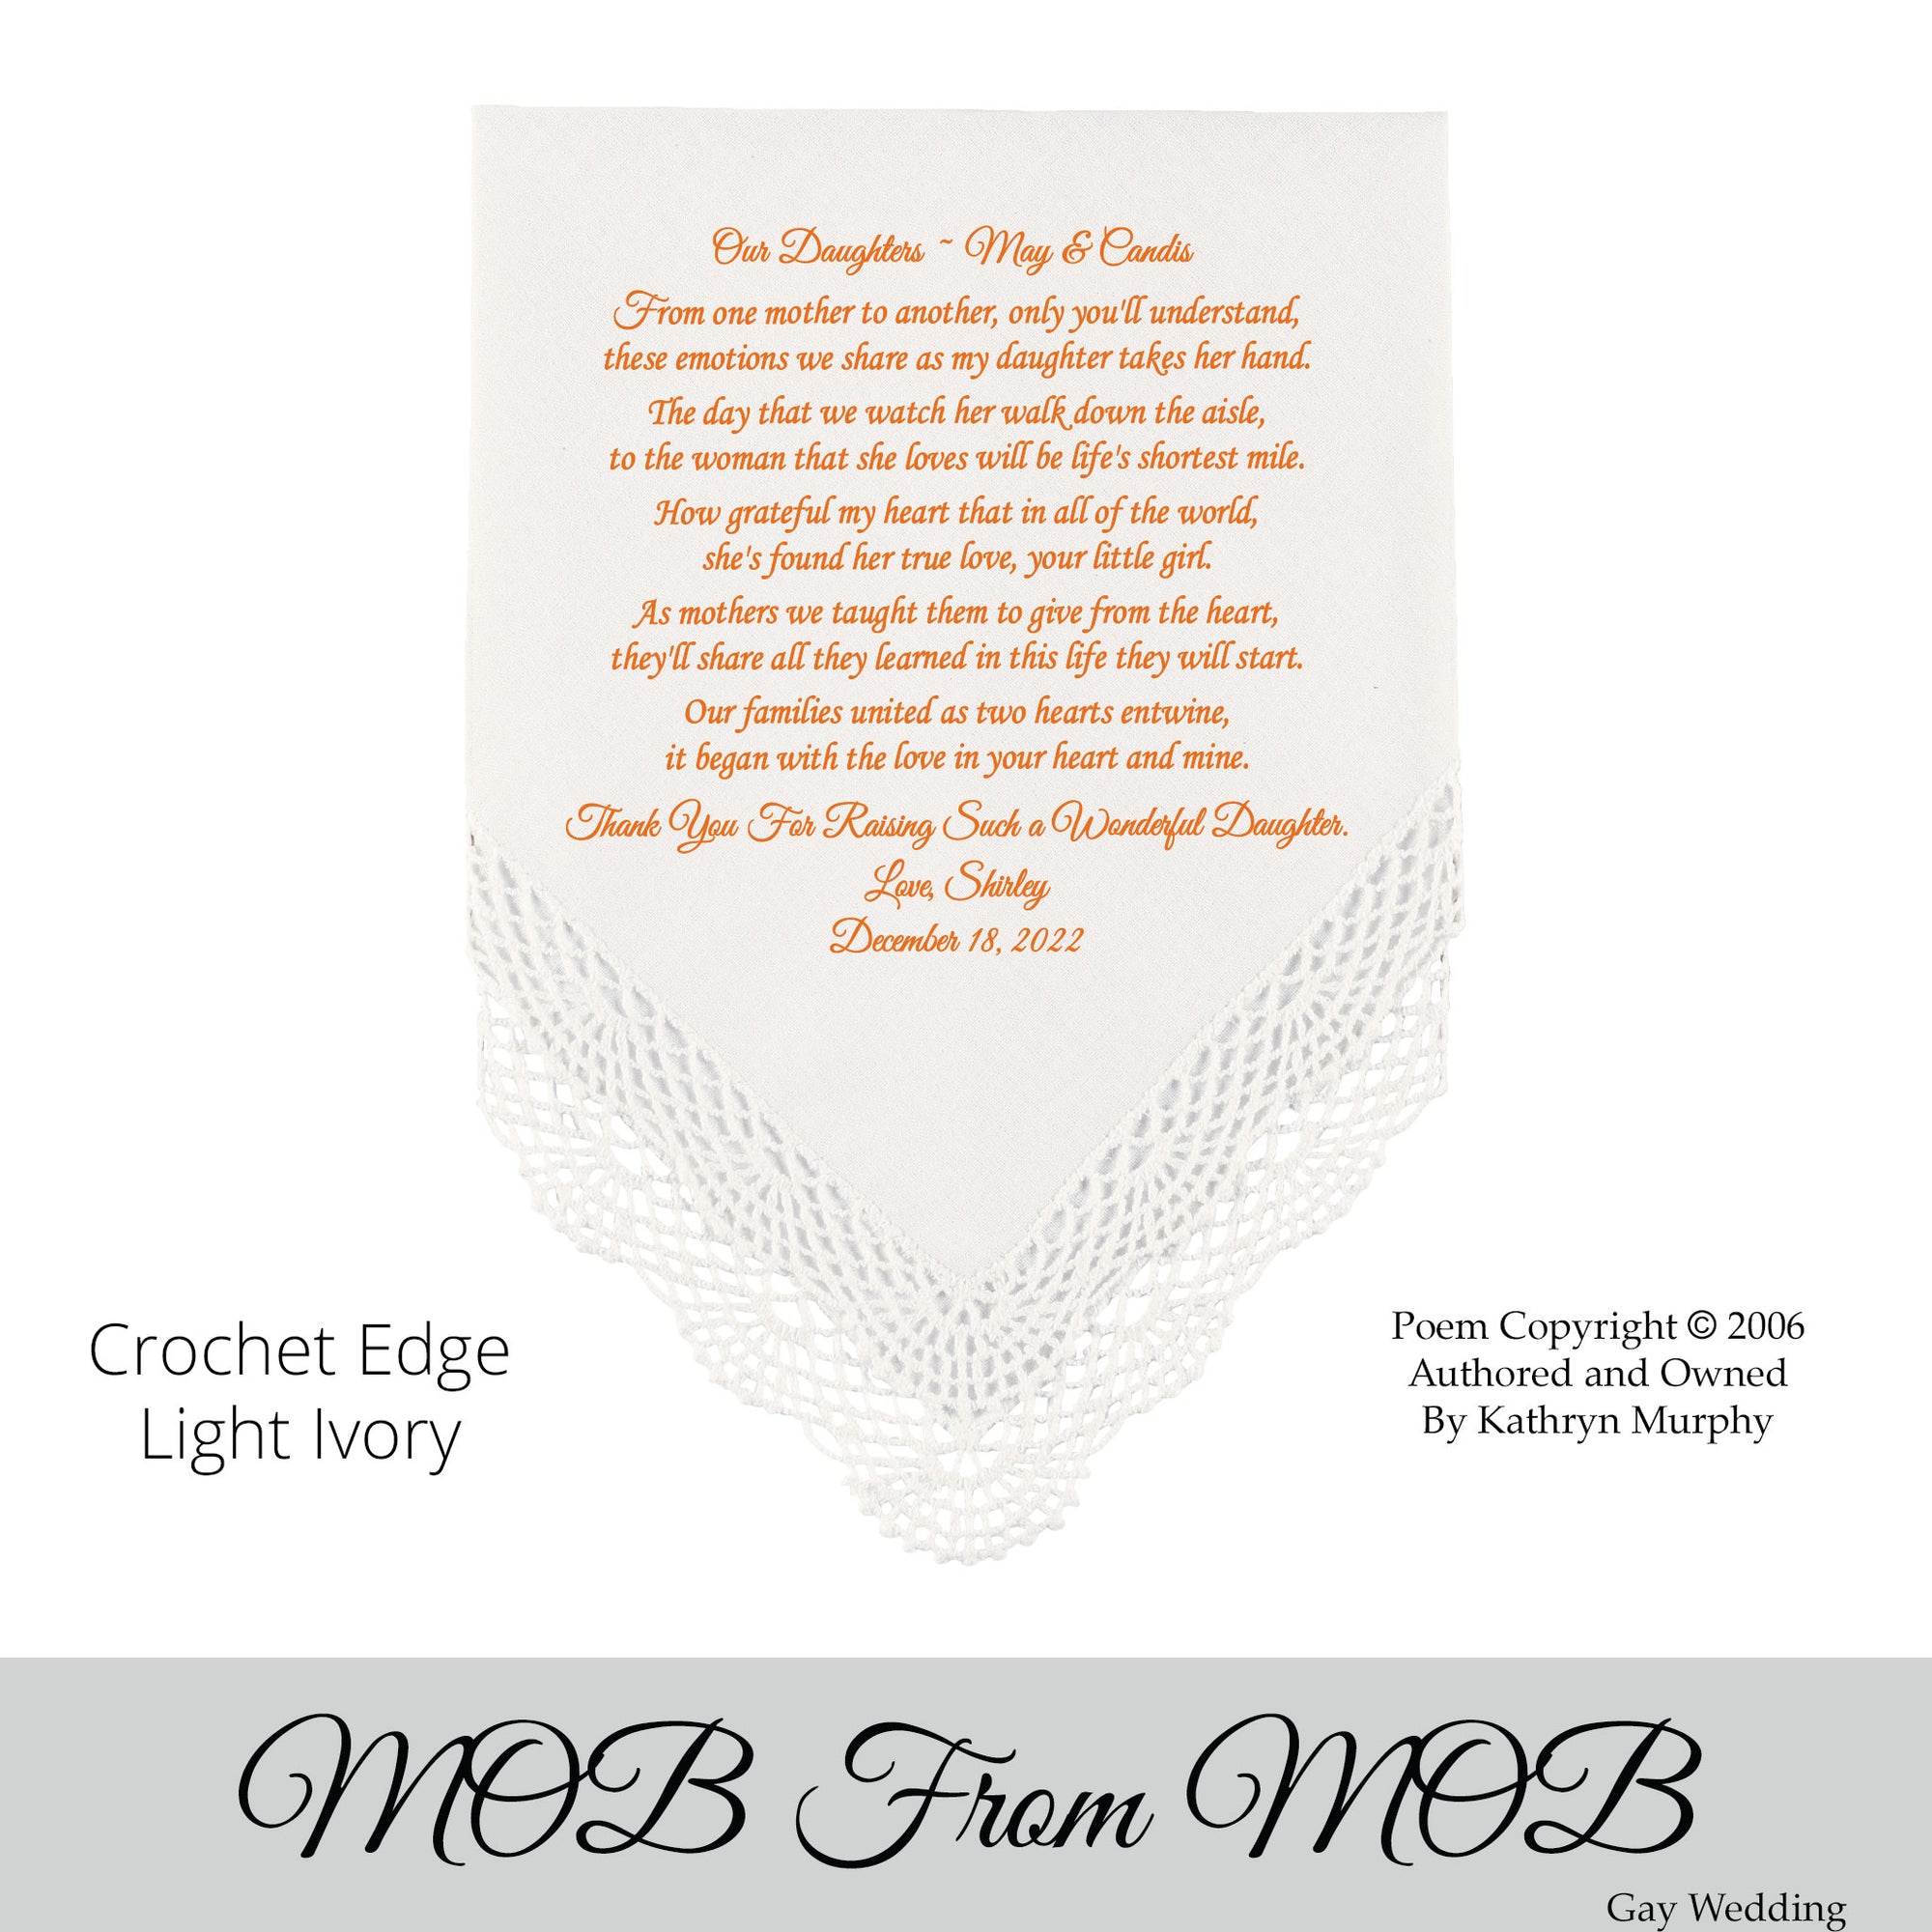 Gay Wedding Gift for the Mother of the Bride poem printed wedding hankie